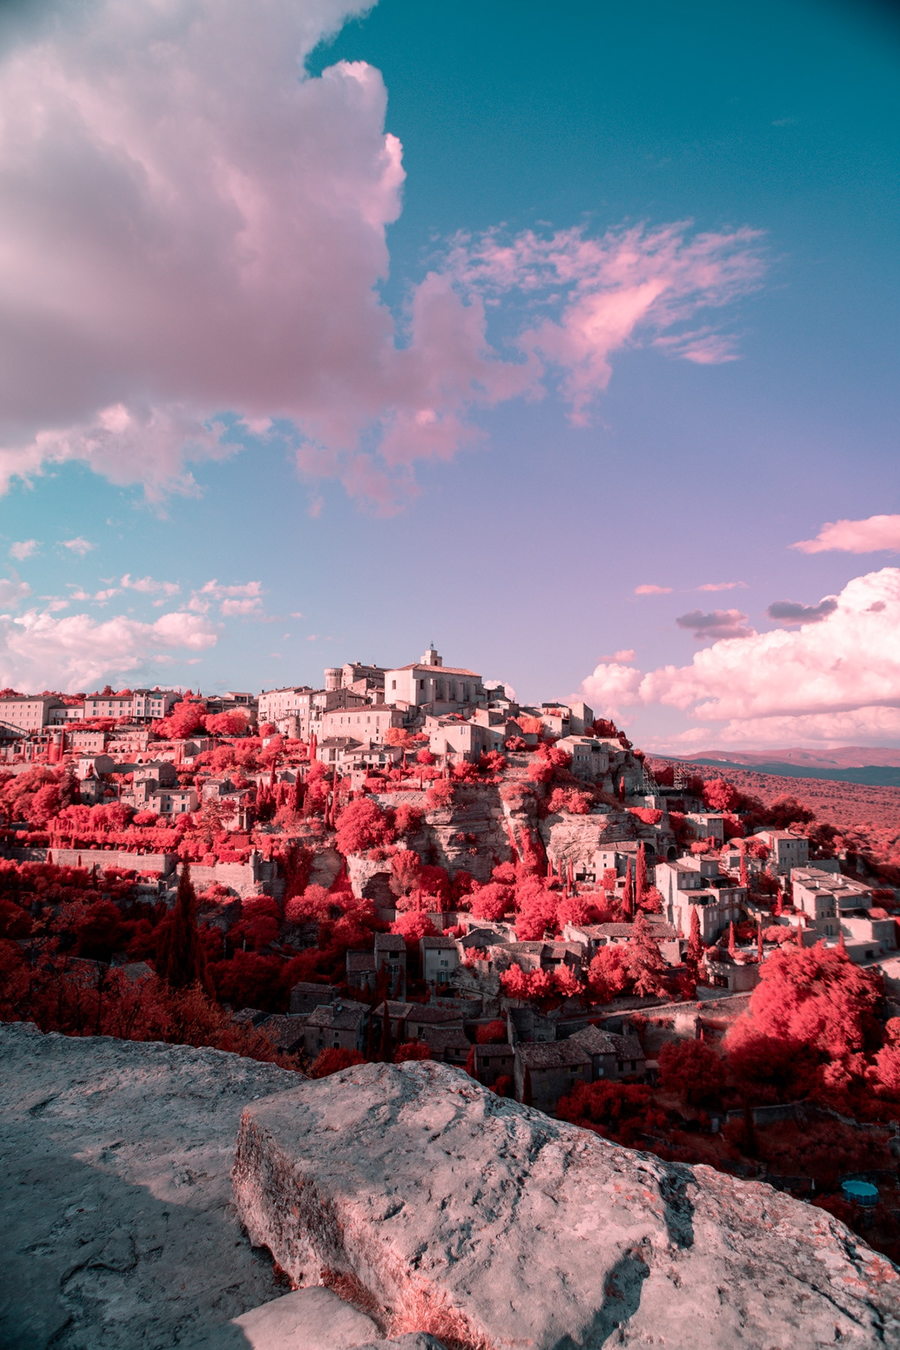 Gorgeous infrared photo shows a French city on a hill, as featured in Paolo Pettigiani's 